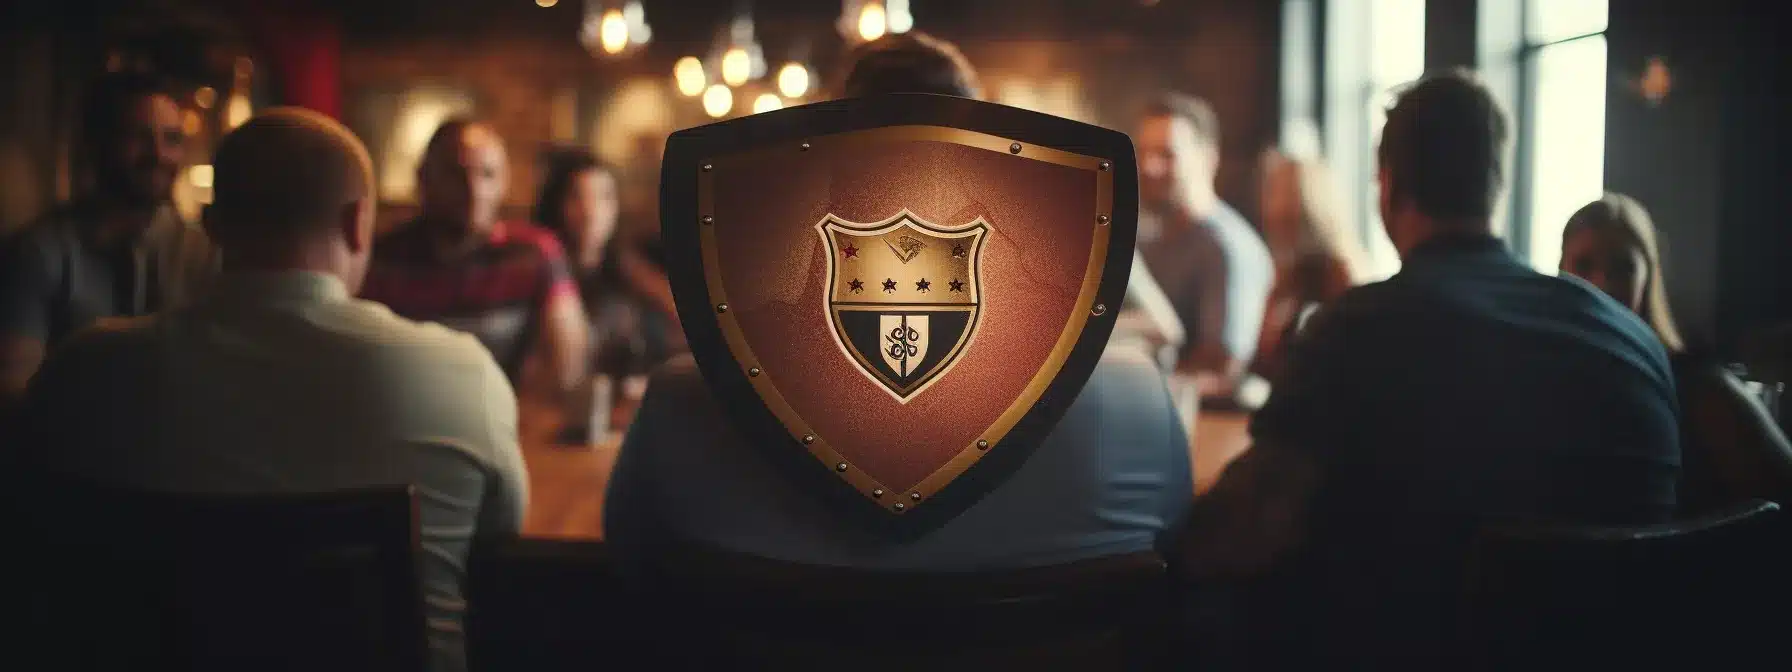 A Brand Logo On A Shield Surrounded By Customers With Crowns On Their Heads, Symbolizing Brand Resilience And Customer Loyalty In Times Of Crisis.